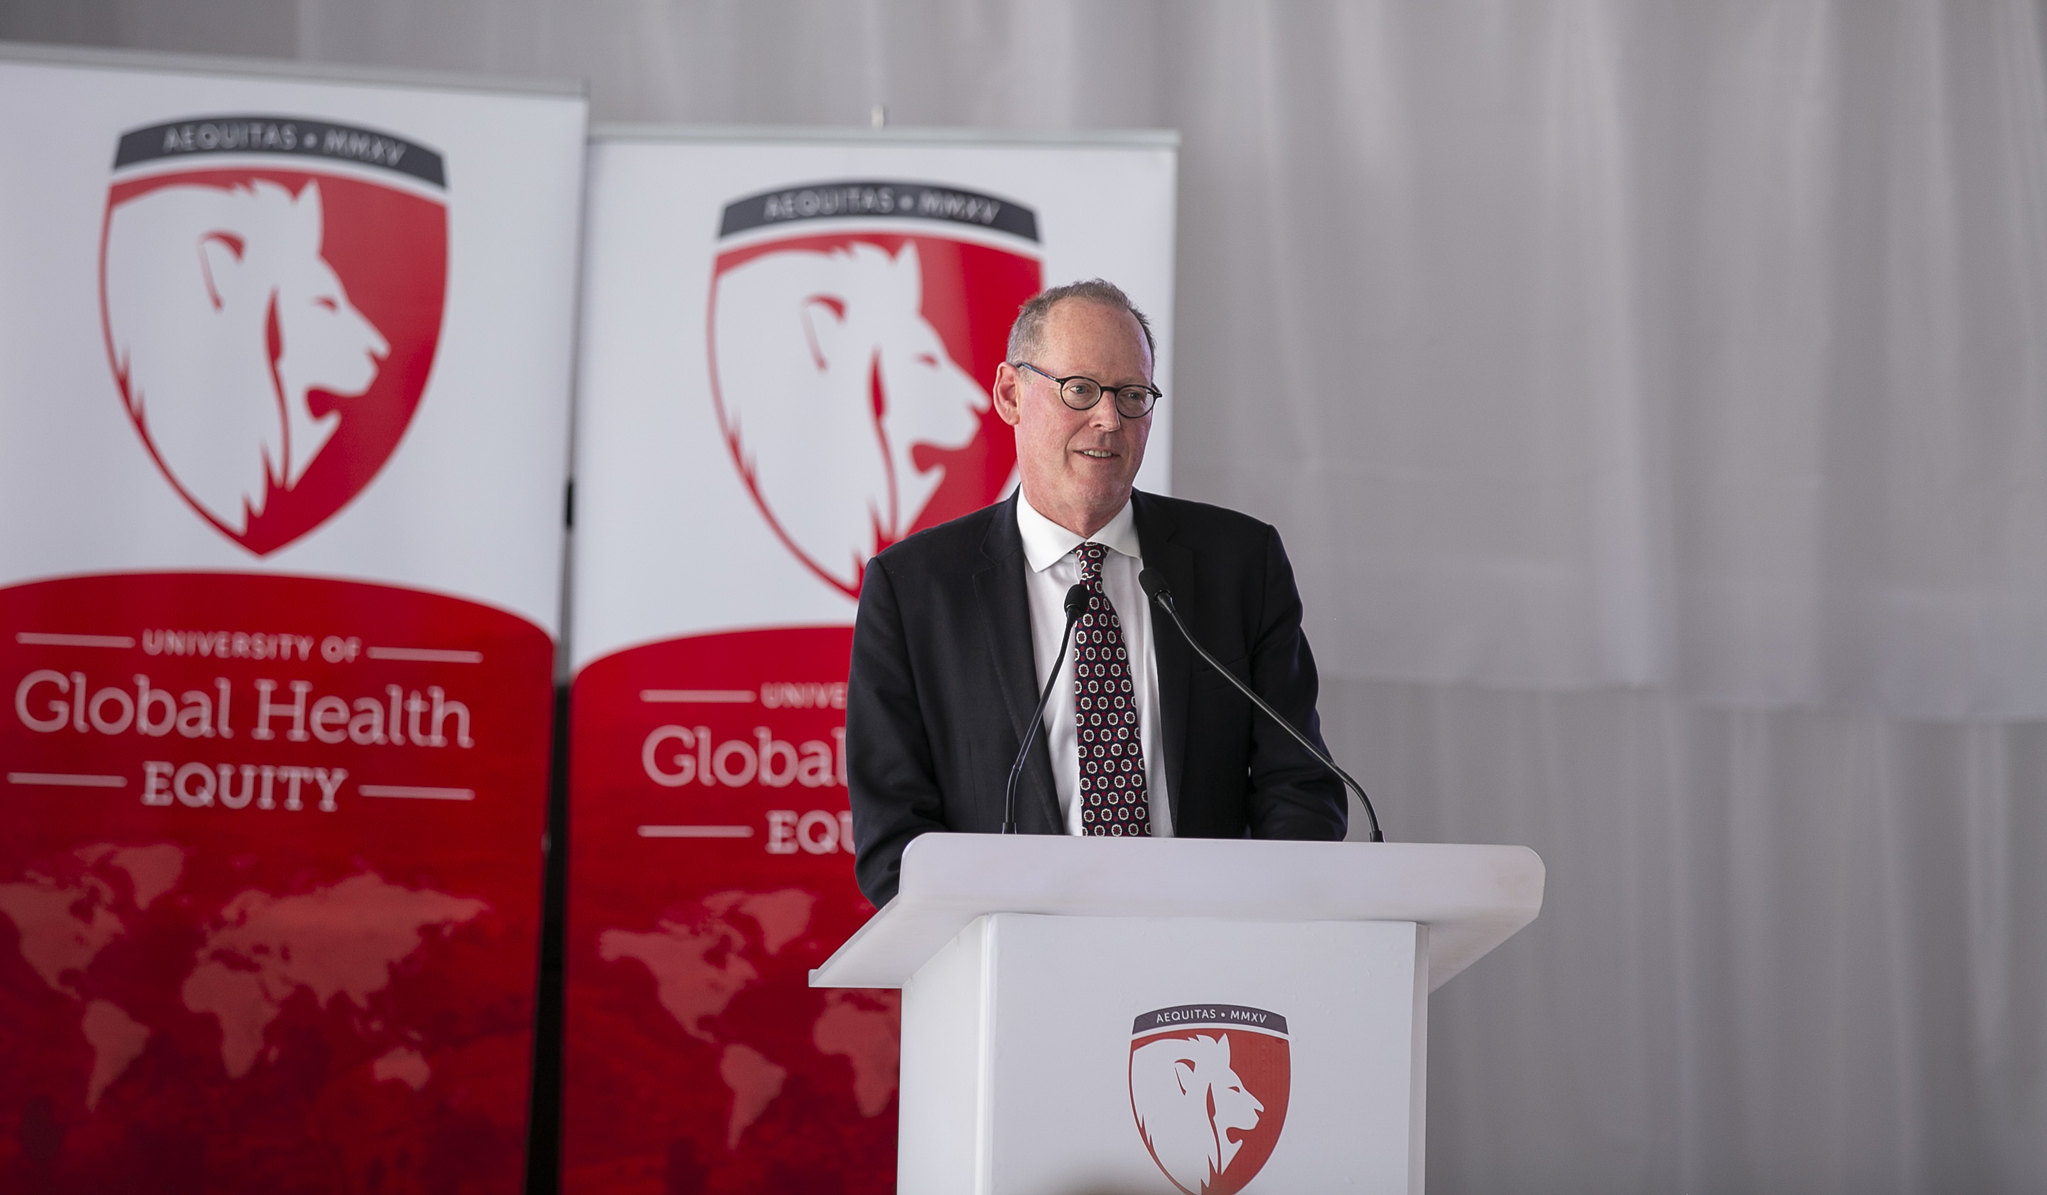 Dr Paul Farmer speaking at the launch of the new campus of the University of Global Health Equity in Butaro, Burera District. 